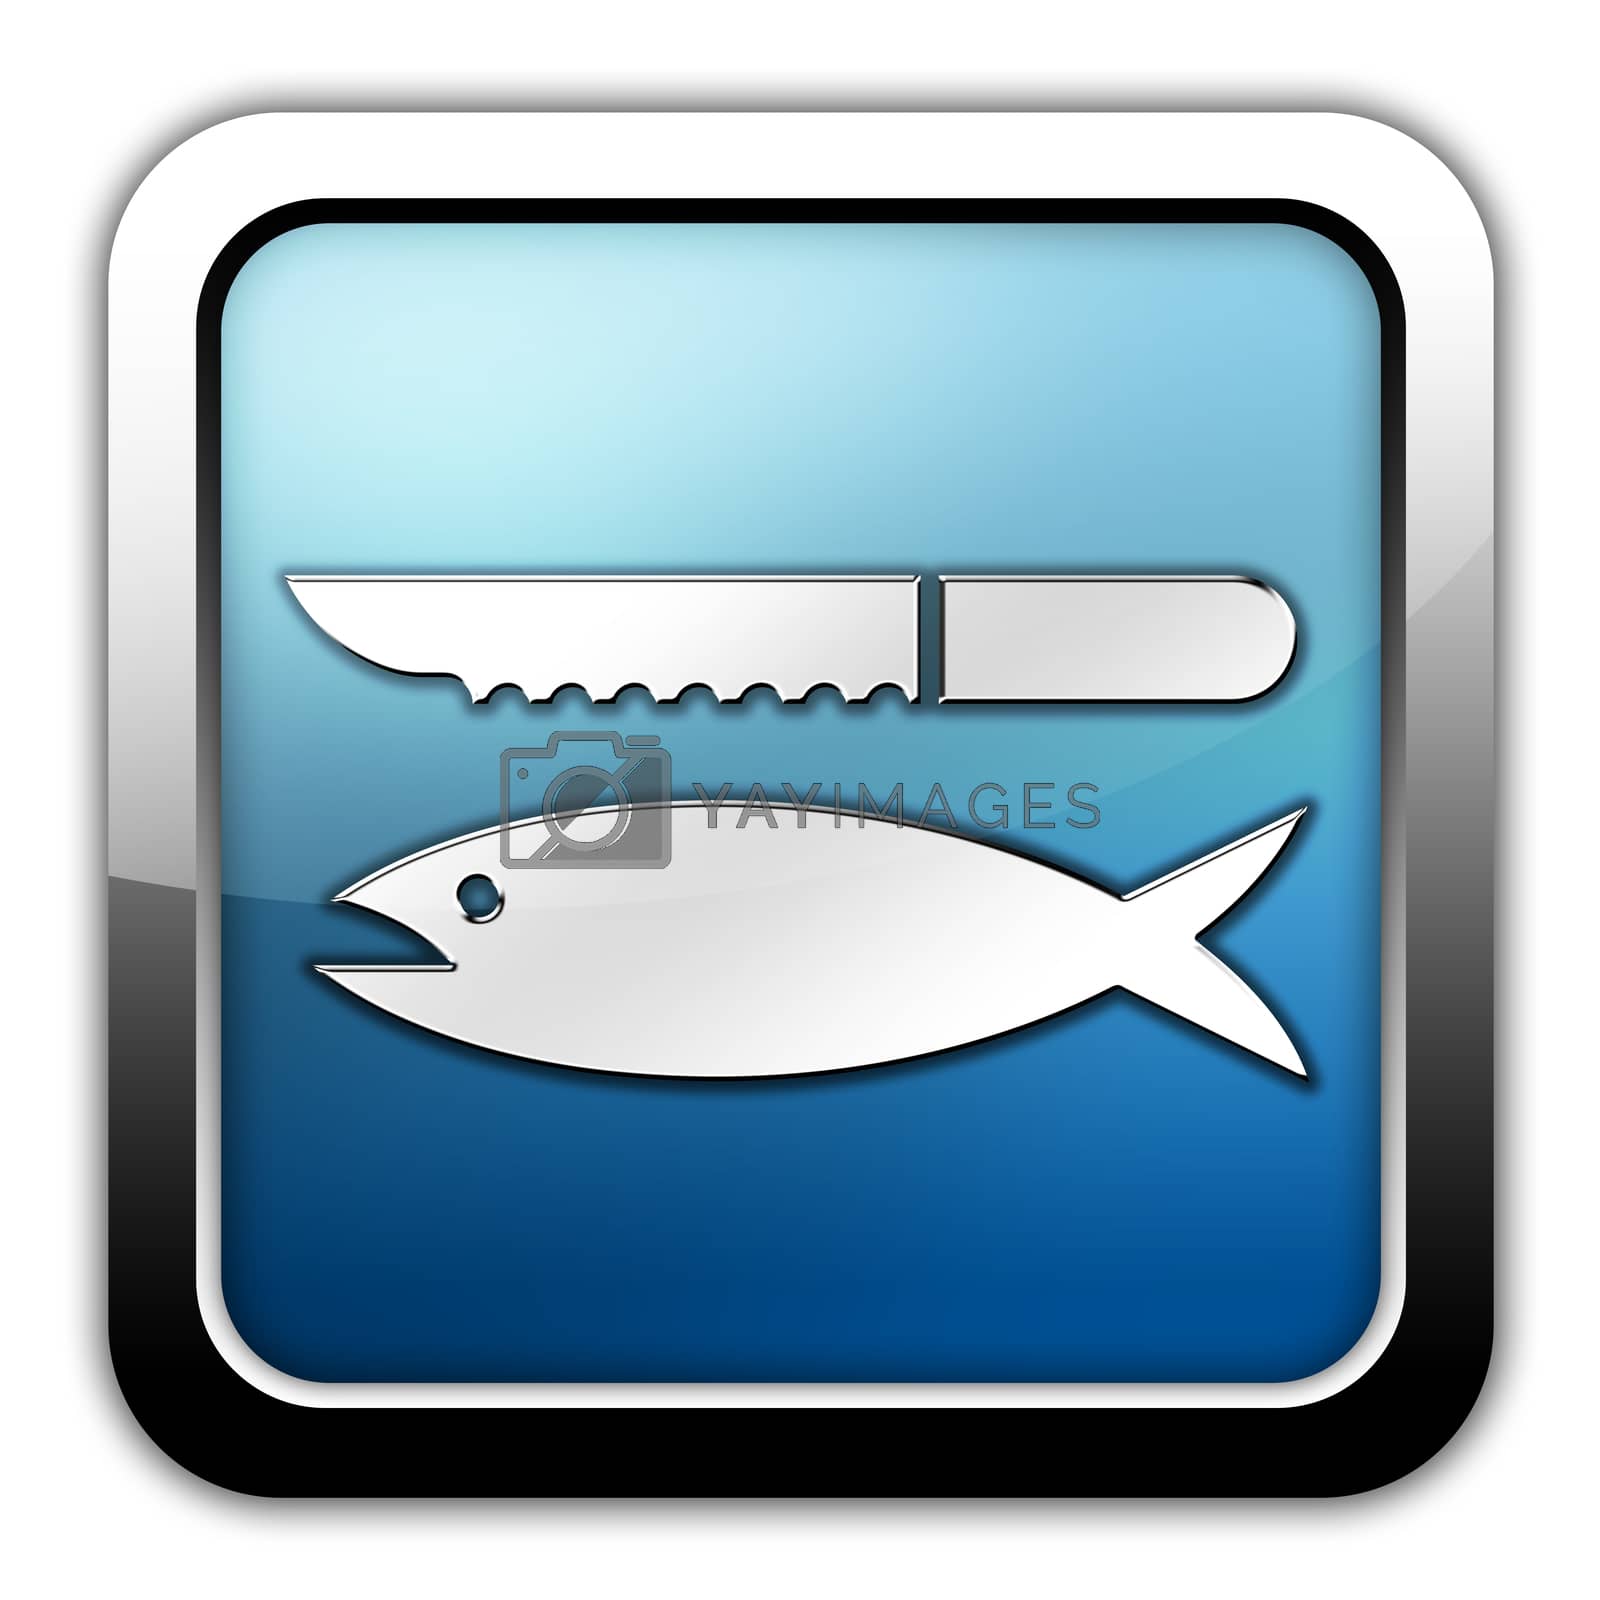 Royalty free image of Icon, Button, Pictogram Fish Cleaning by mindscanner